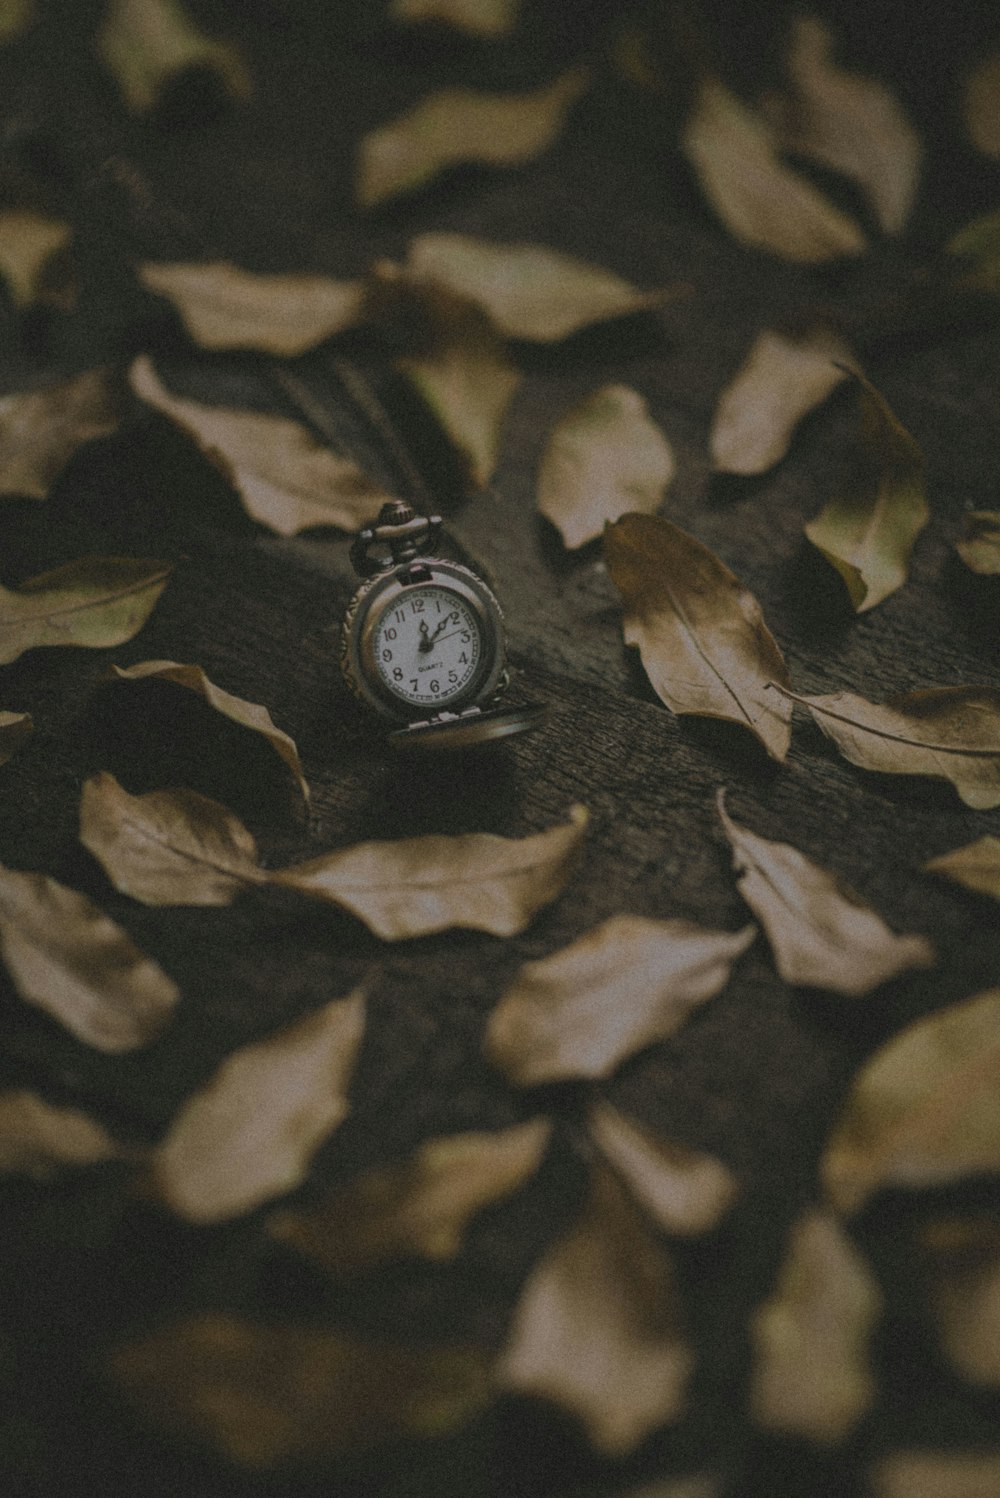 round silver-colored pocket watch at 12:09